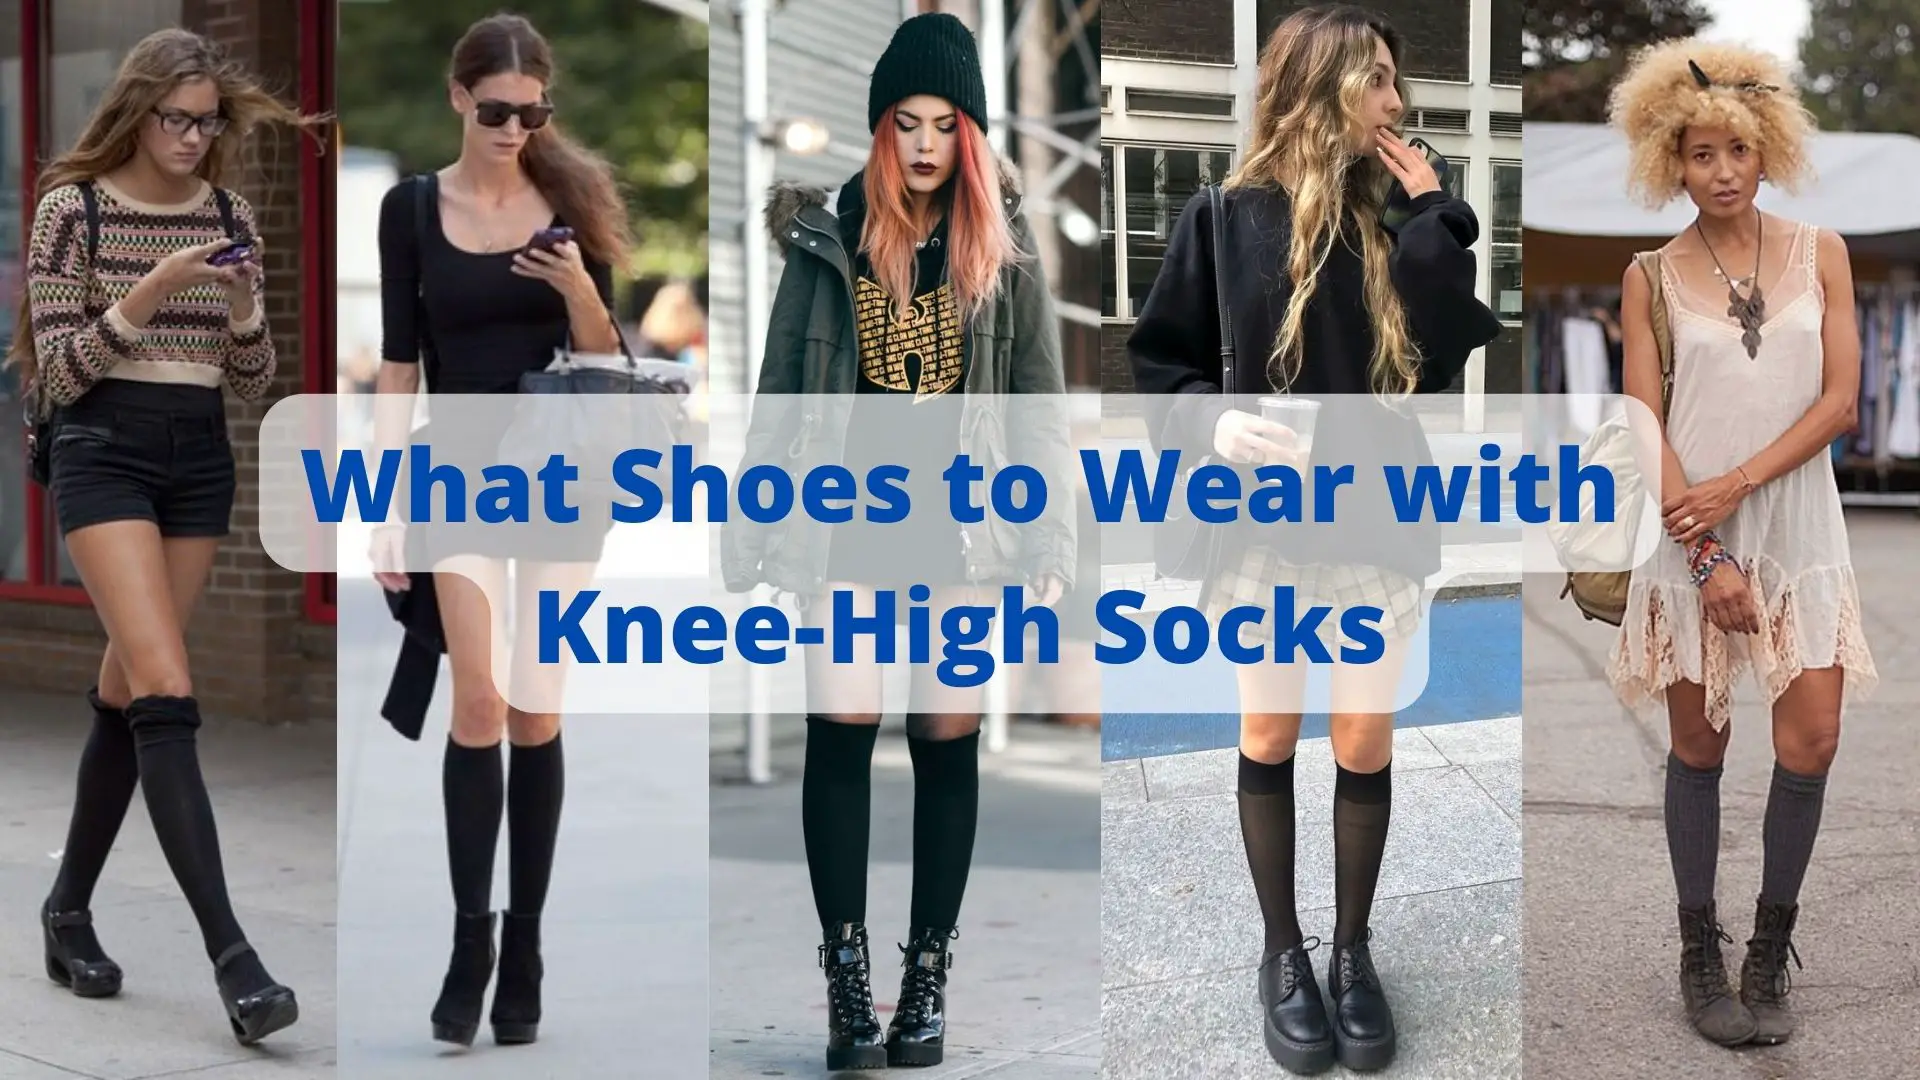 What Shoes to Wear with Knee-High Socks